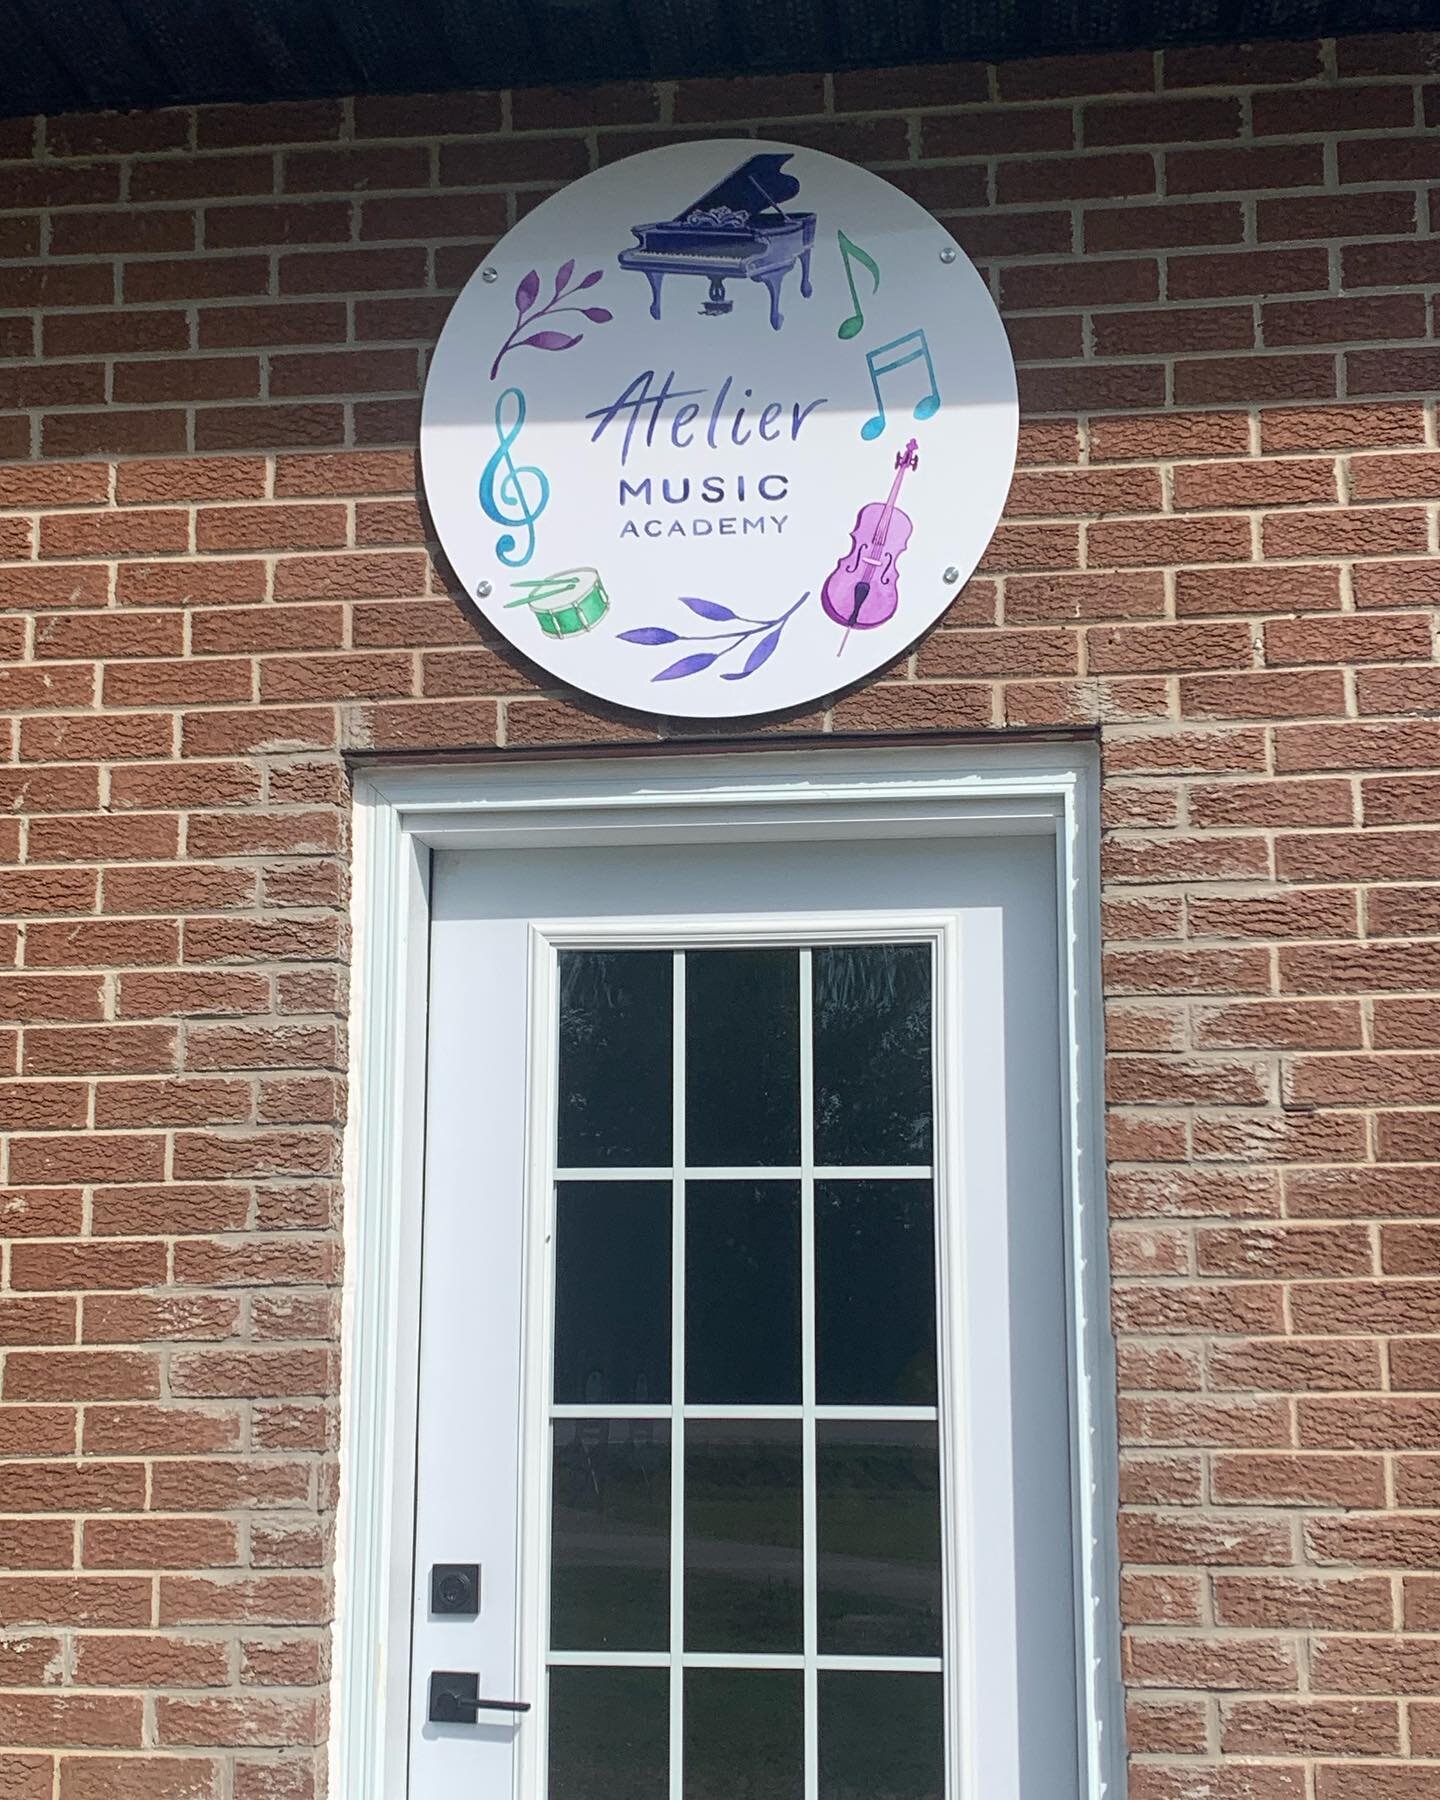 Thanks to everyone who stopped by our Grand Opening yesterday. It was a huge success! We were so busy that we forgot to take any pictures. 😂 so here&rsquo;s a picture of our studio front door with our lovely new sign. 

In-person lessons start today